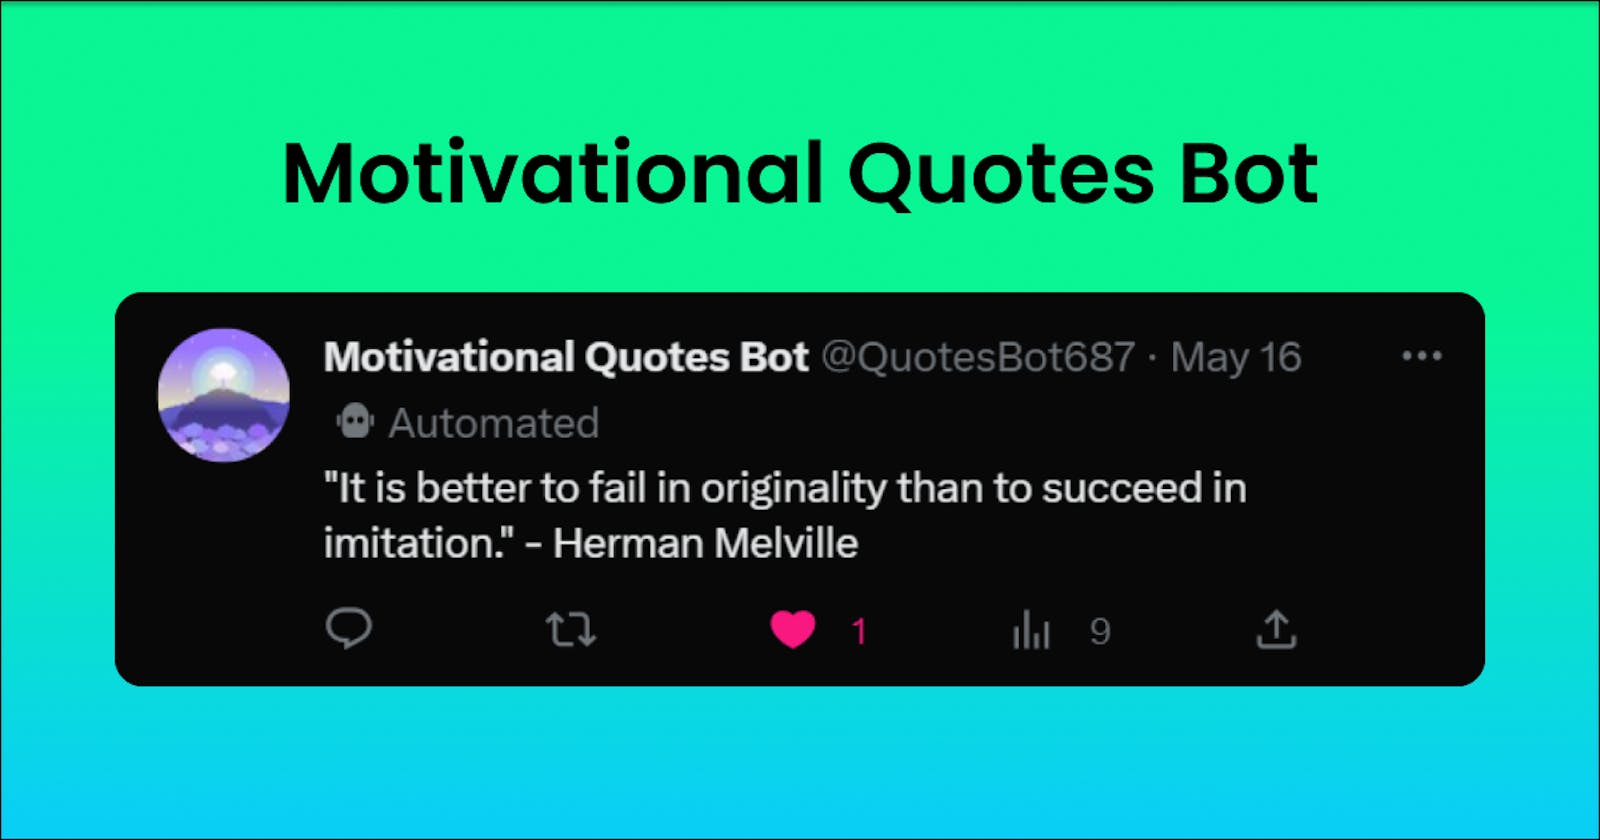 Presenting Motivational Quotes Bot: Your Daily Dose of Motivation on Twitter!